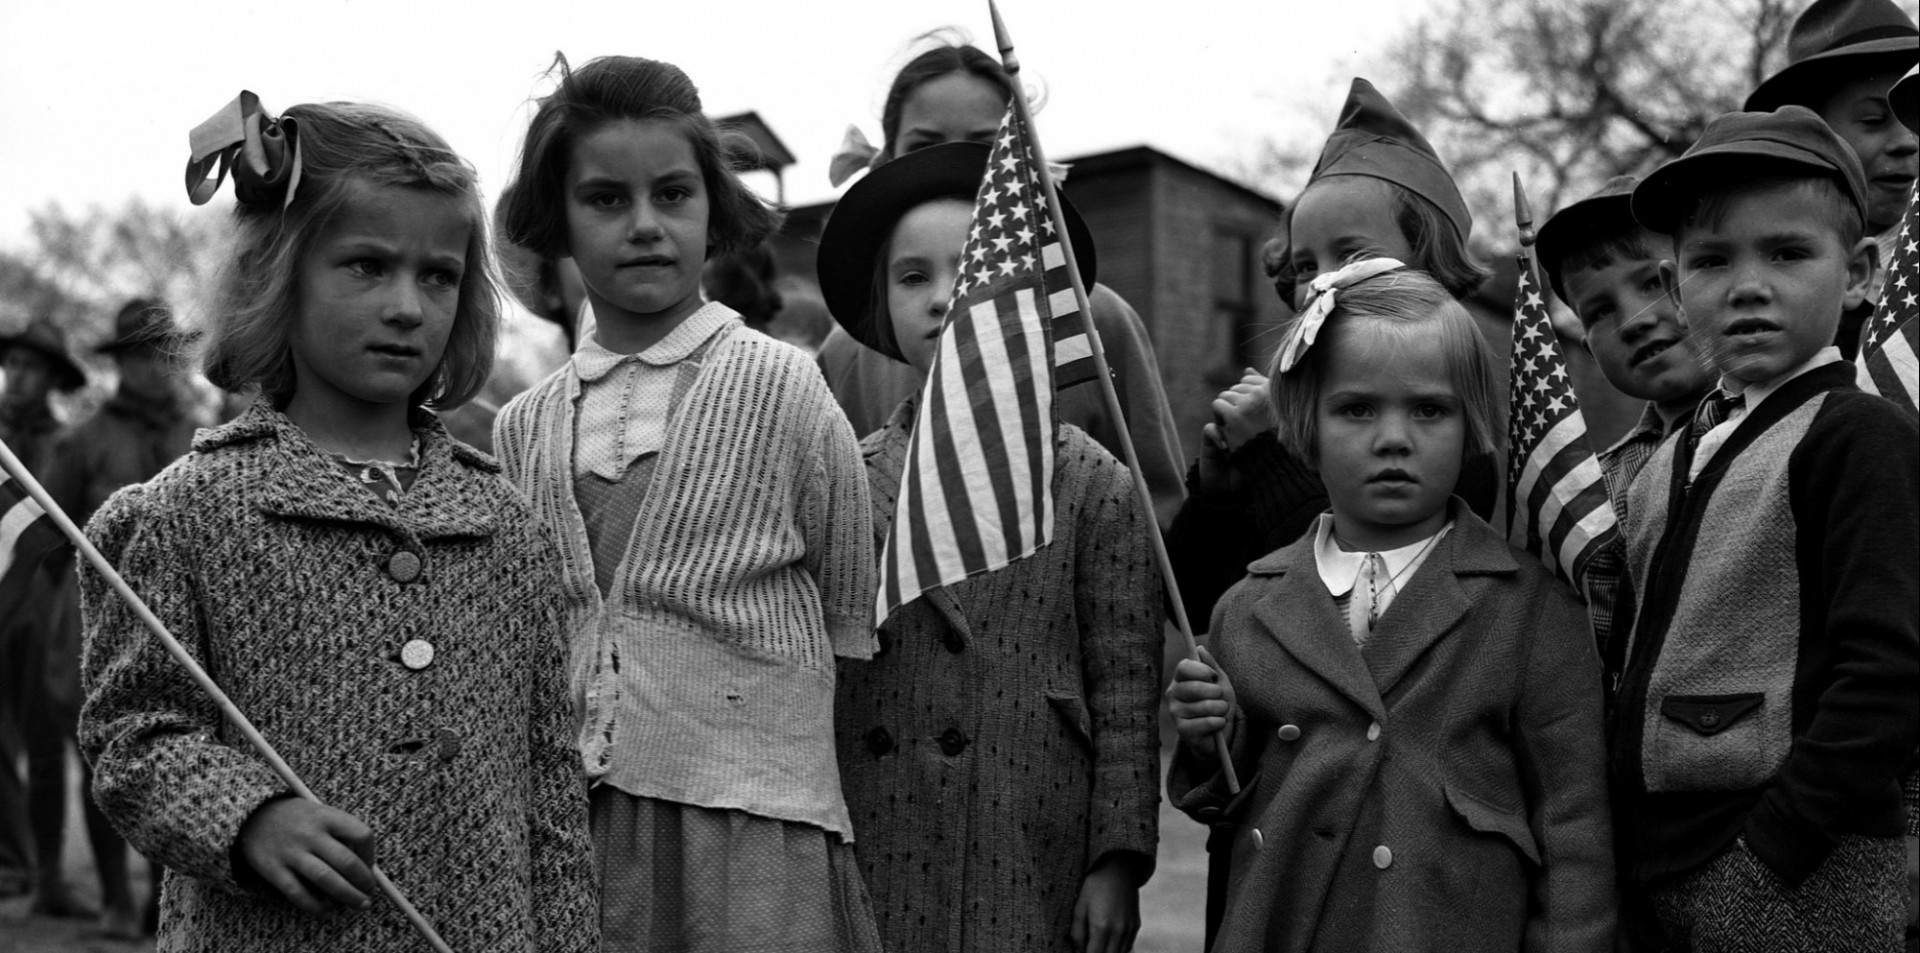 Children with U.S. flags 1943